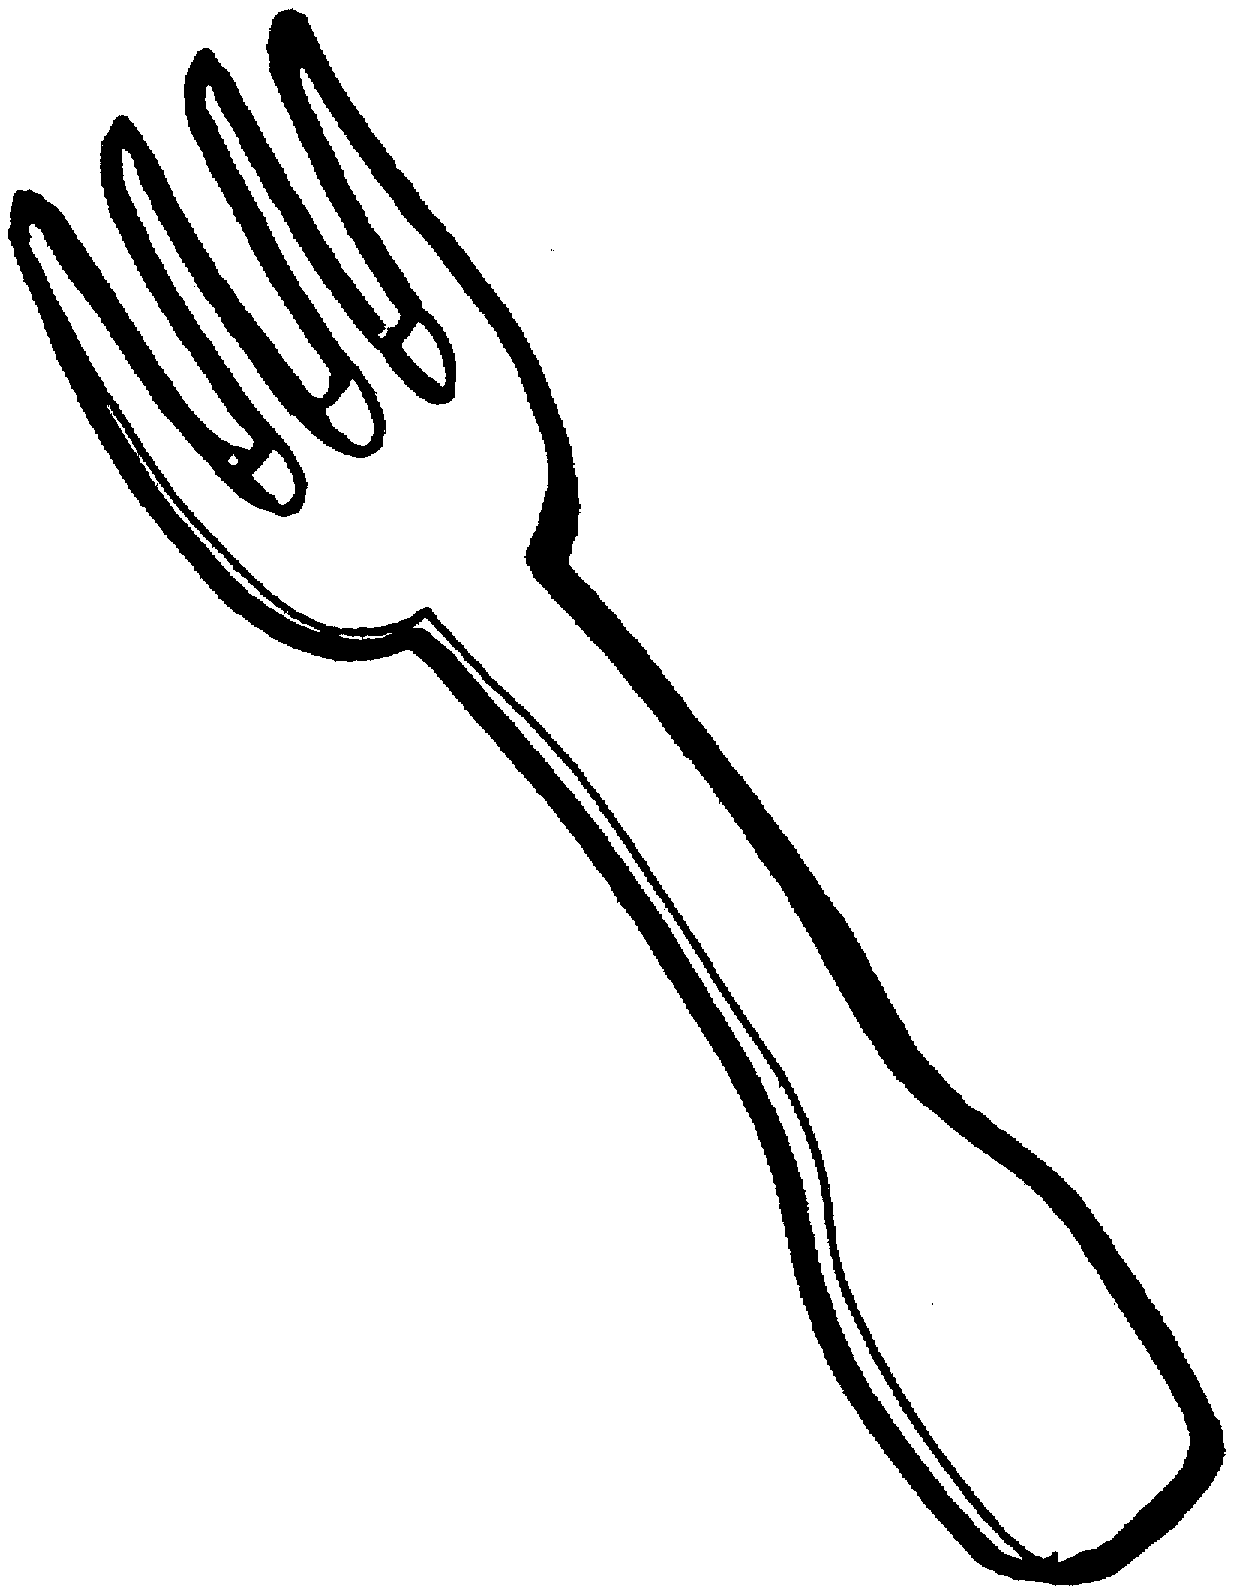 Fork Drawing - Clipart library